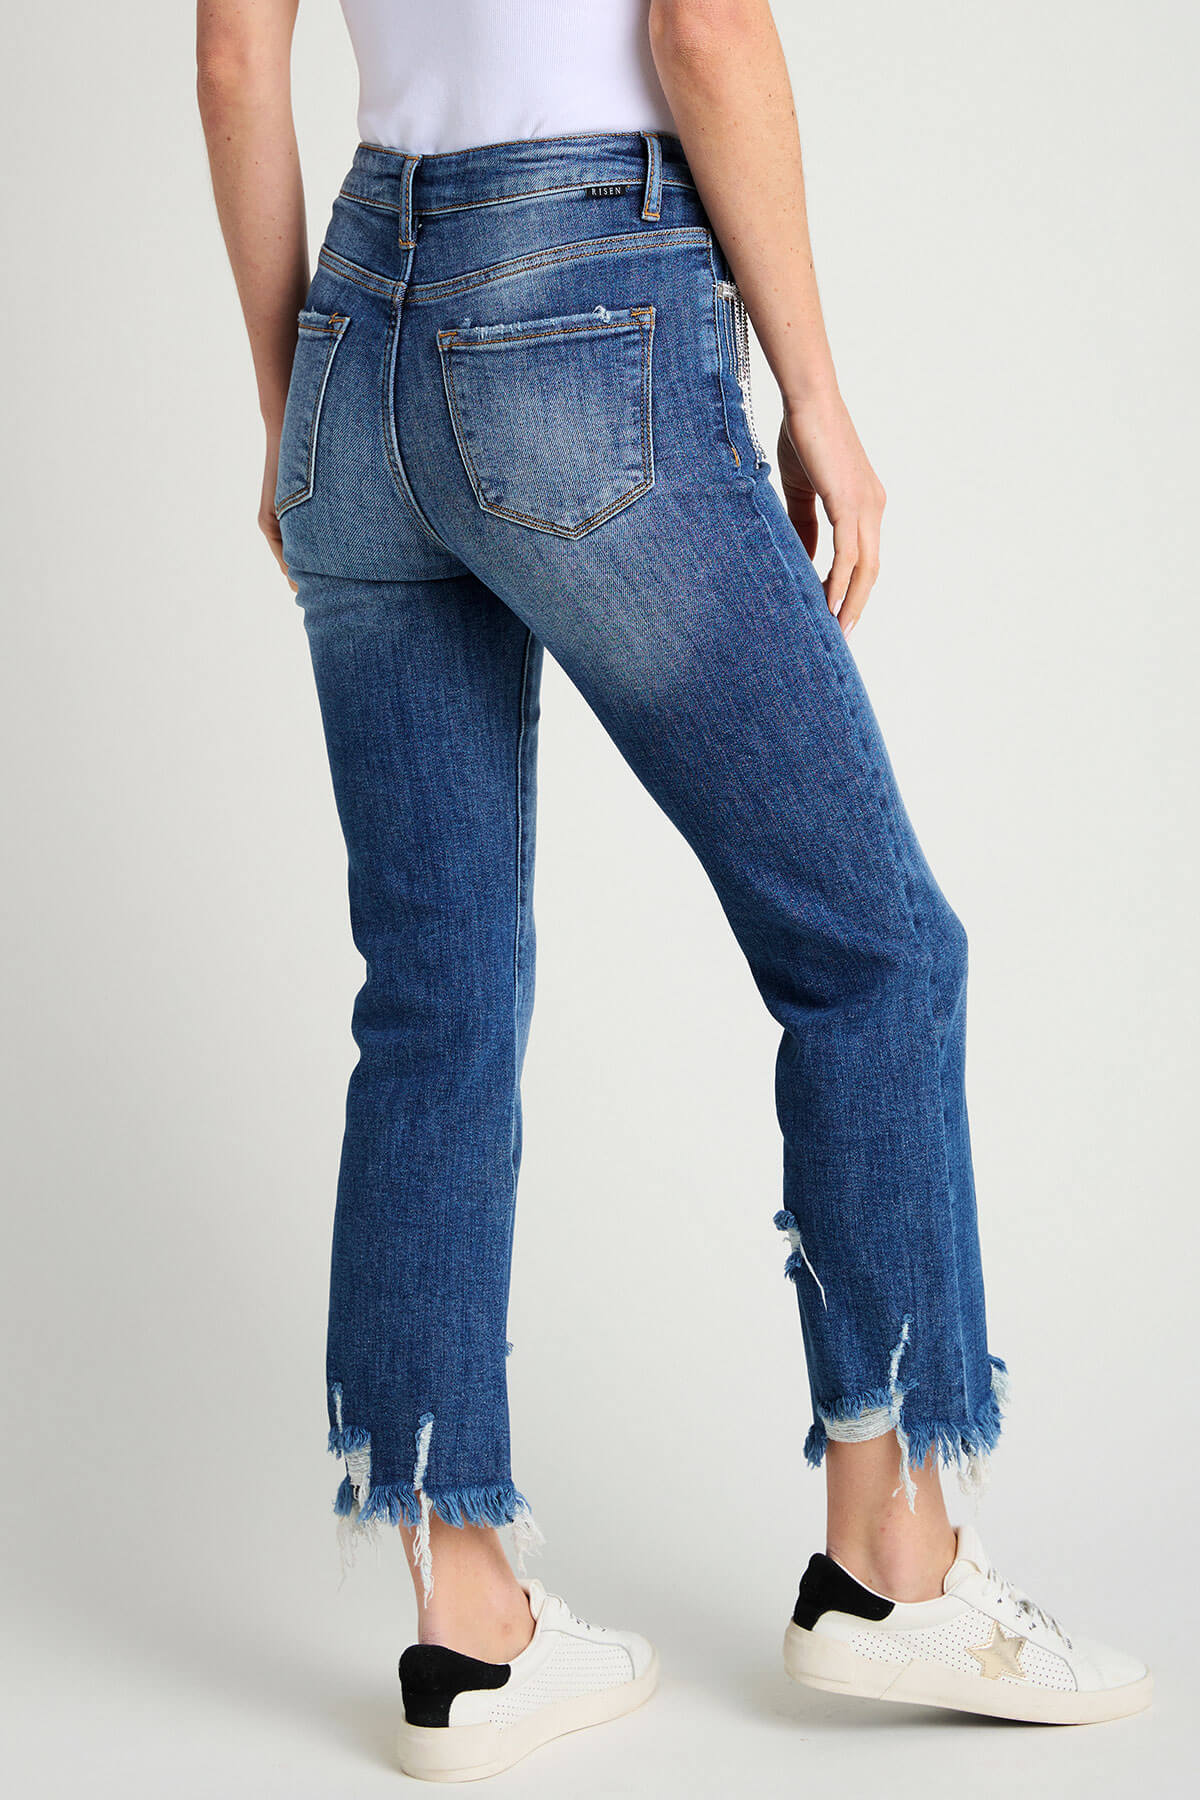 Rhinestone High Rise Straight Jeans in Vintage Distressed Wash